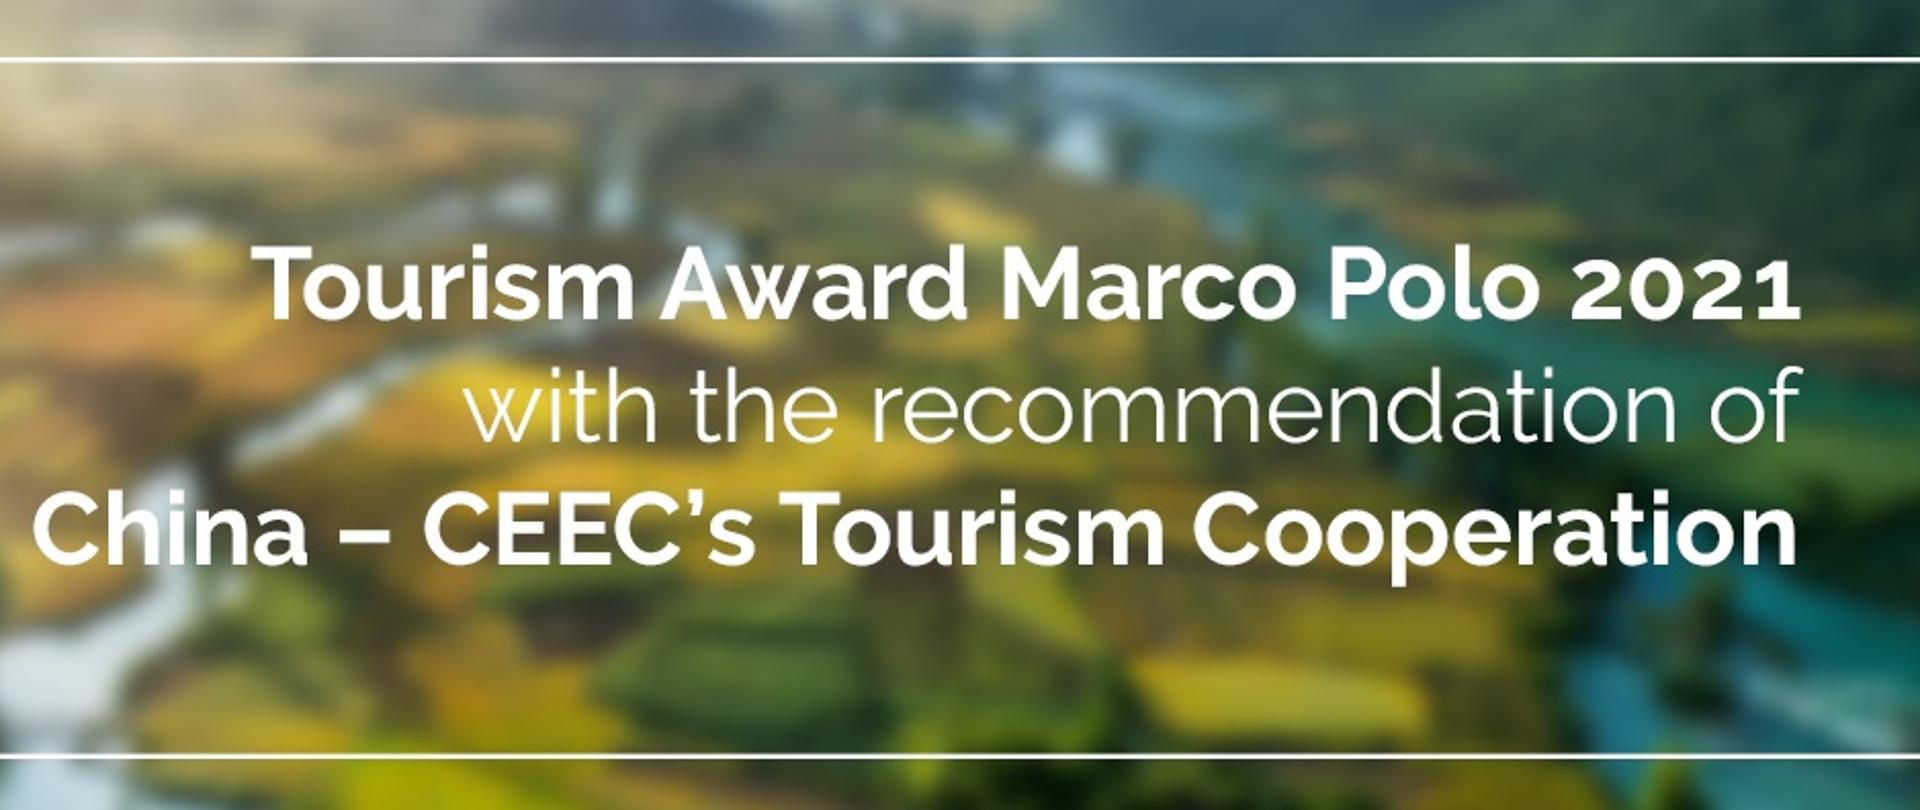 Tourism Award Marco Polo 2021 with the recommendation of China - CEEC's Tourism Cooperation